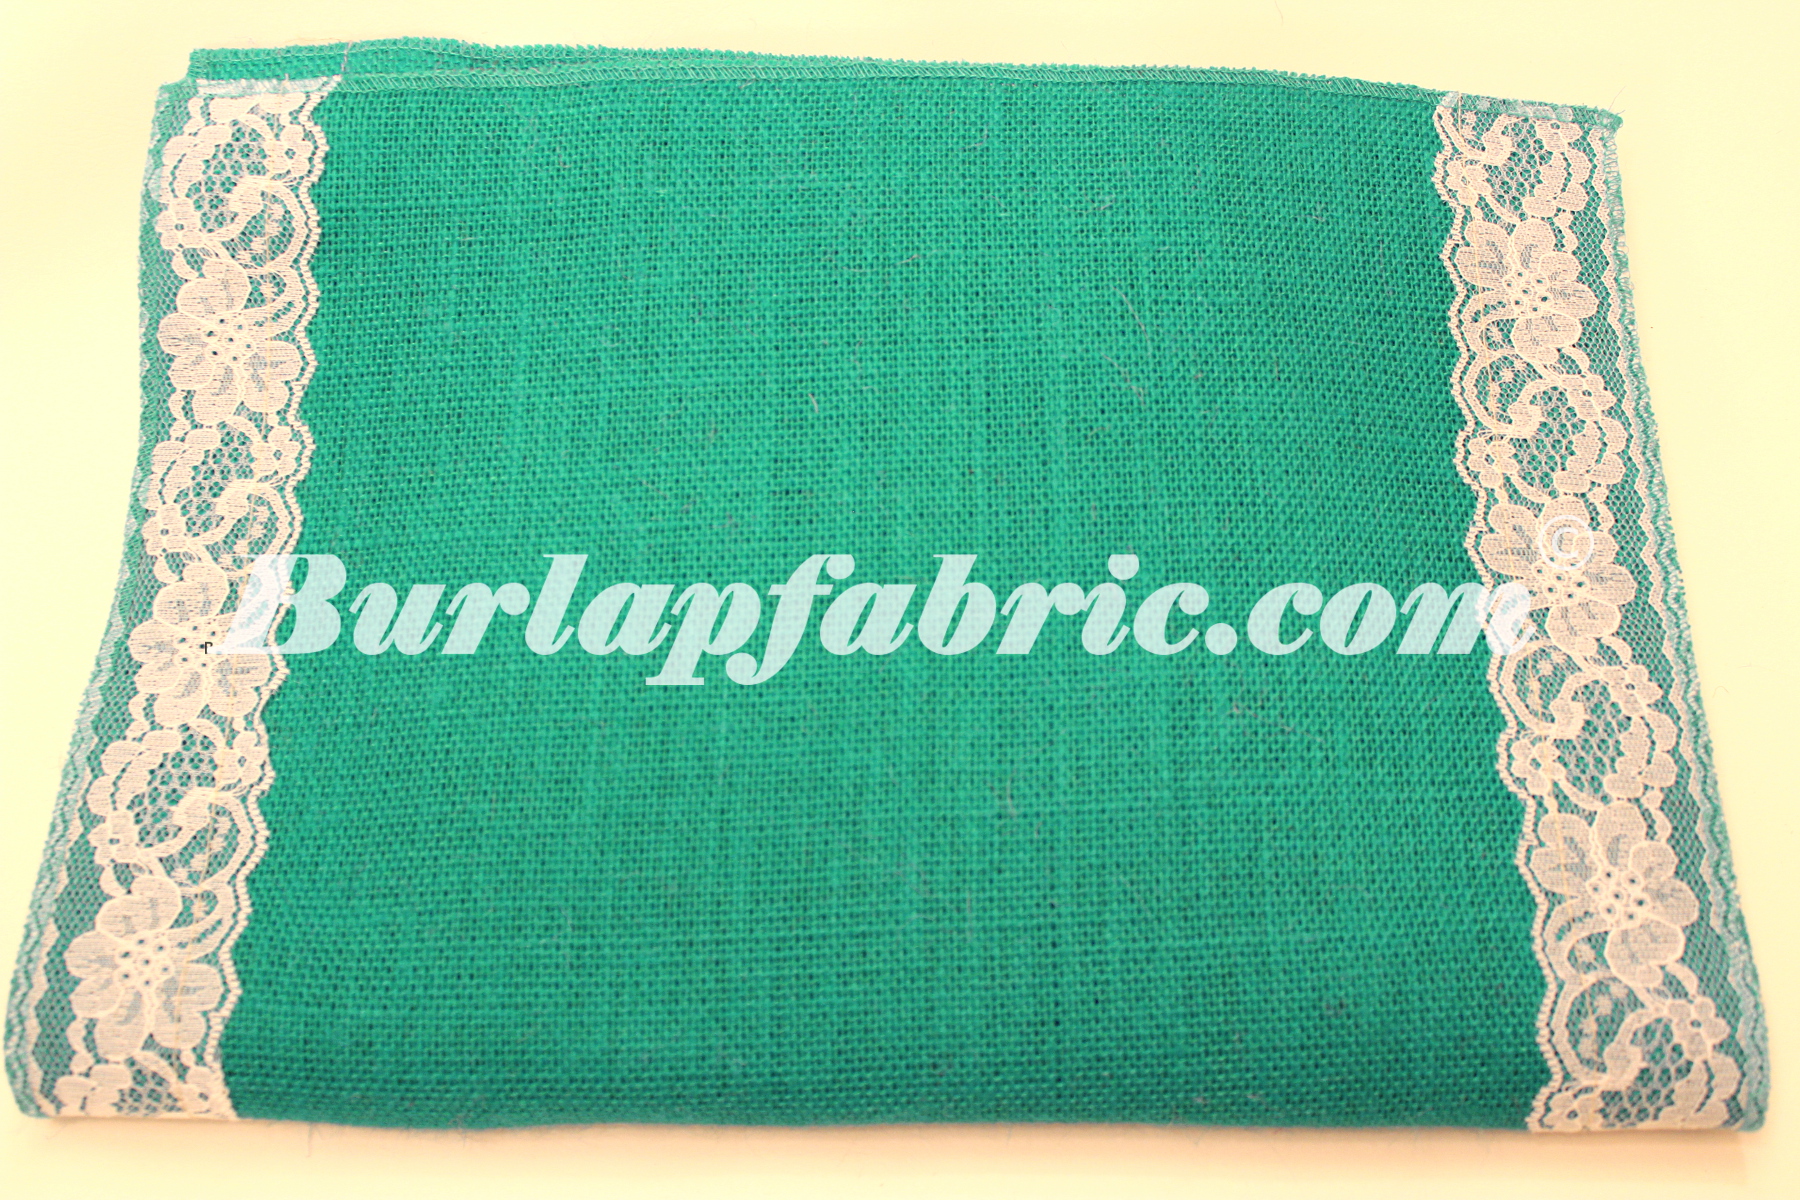 14" Jade Burlap Runner with 2" White Lace Borders